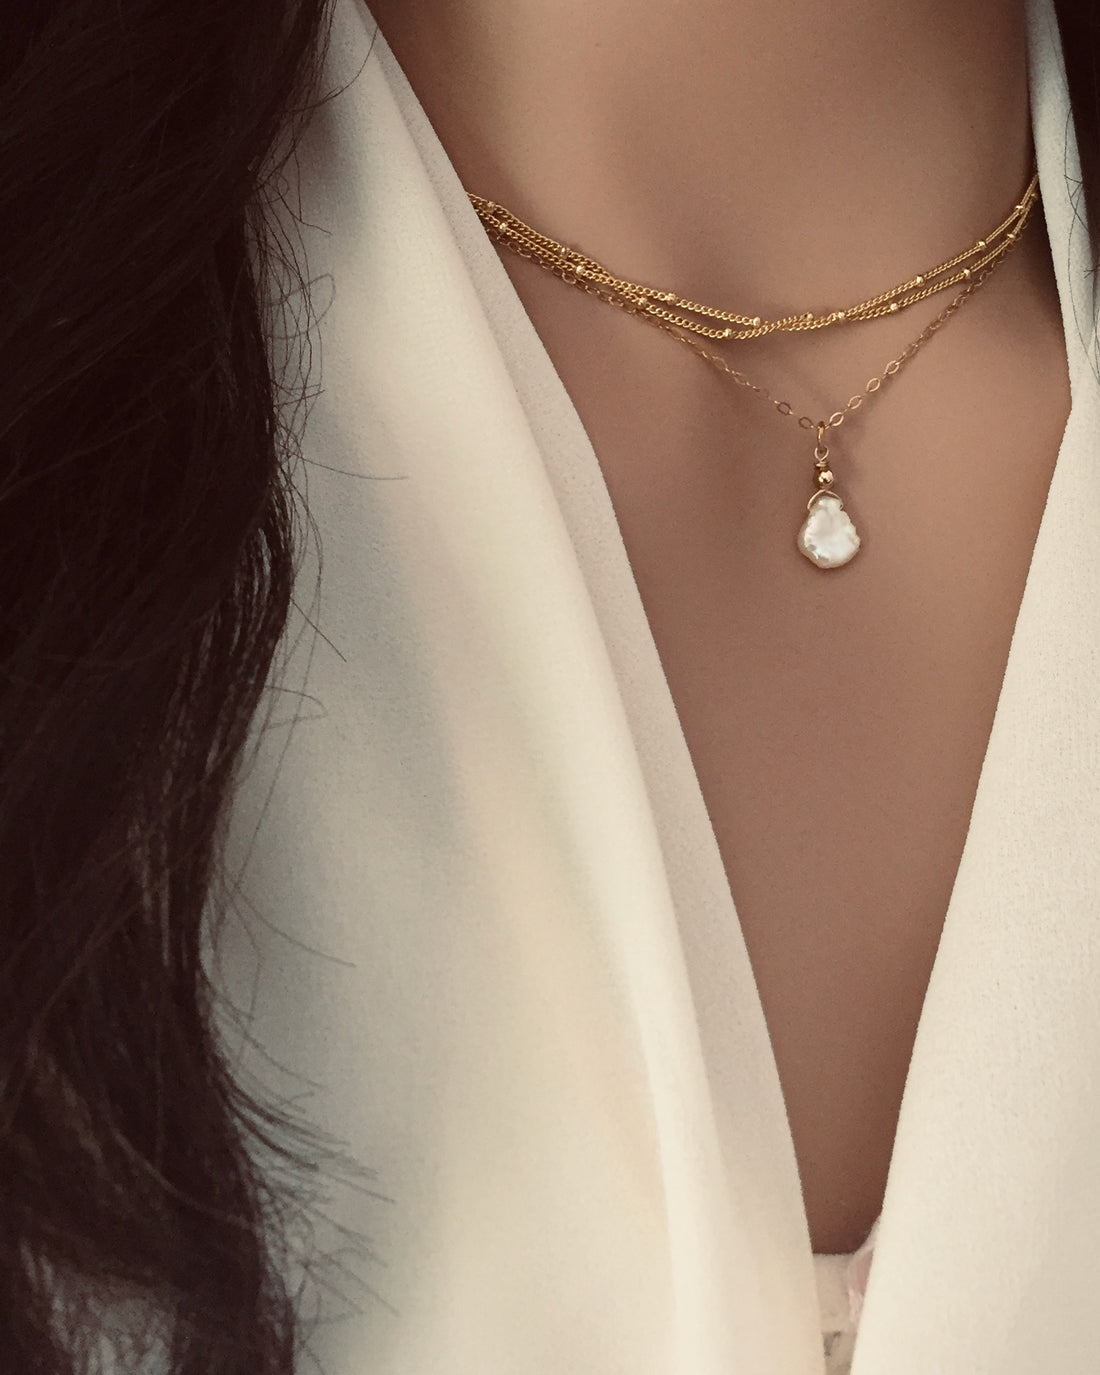 Simple Delicate Necklaces | Small Dainty Necklaces | IB Jewelry